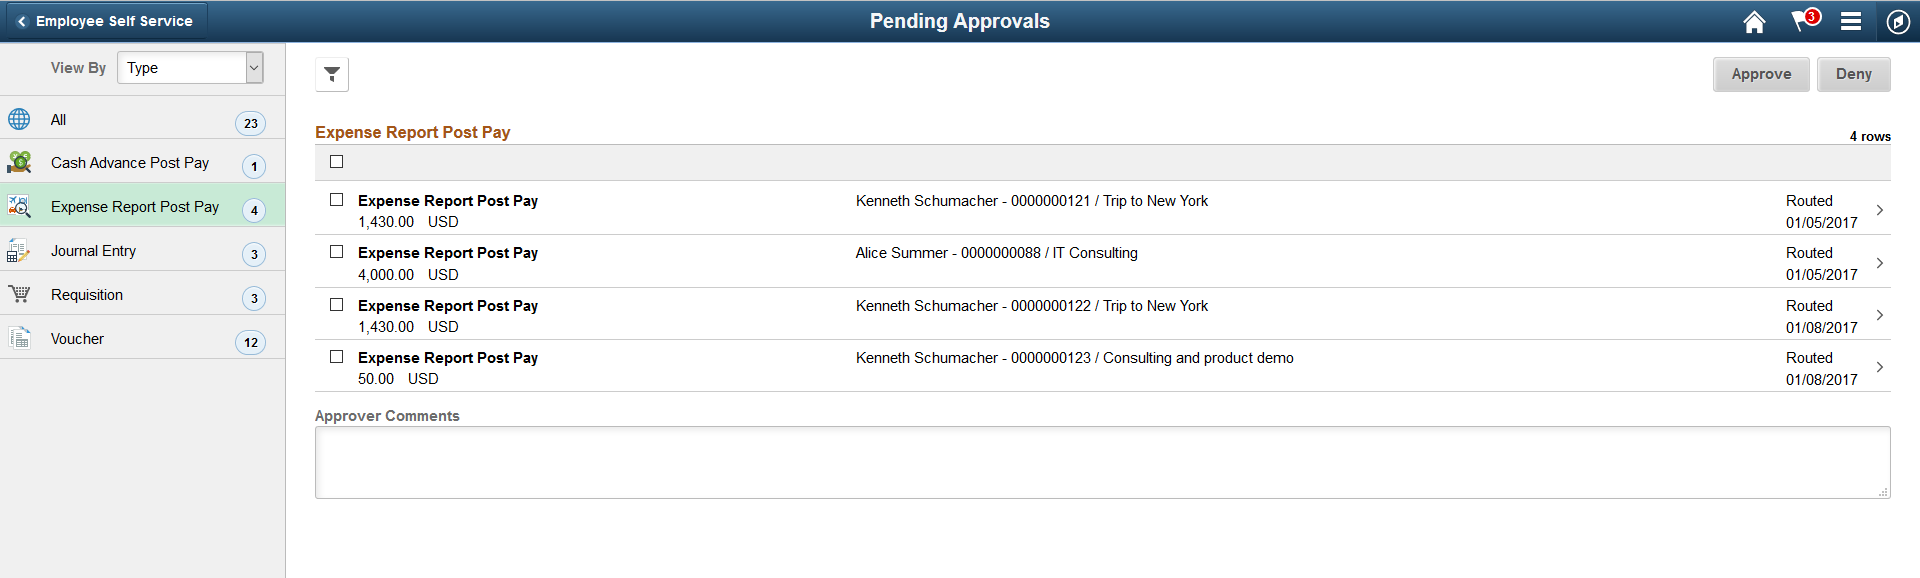 Pending Approvals - Expense Report Post Pay list page